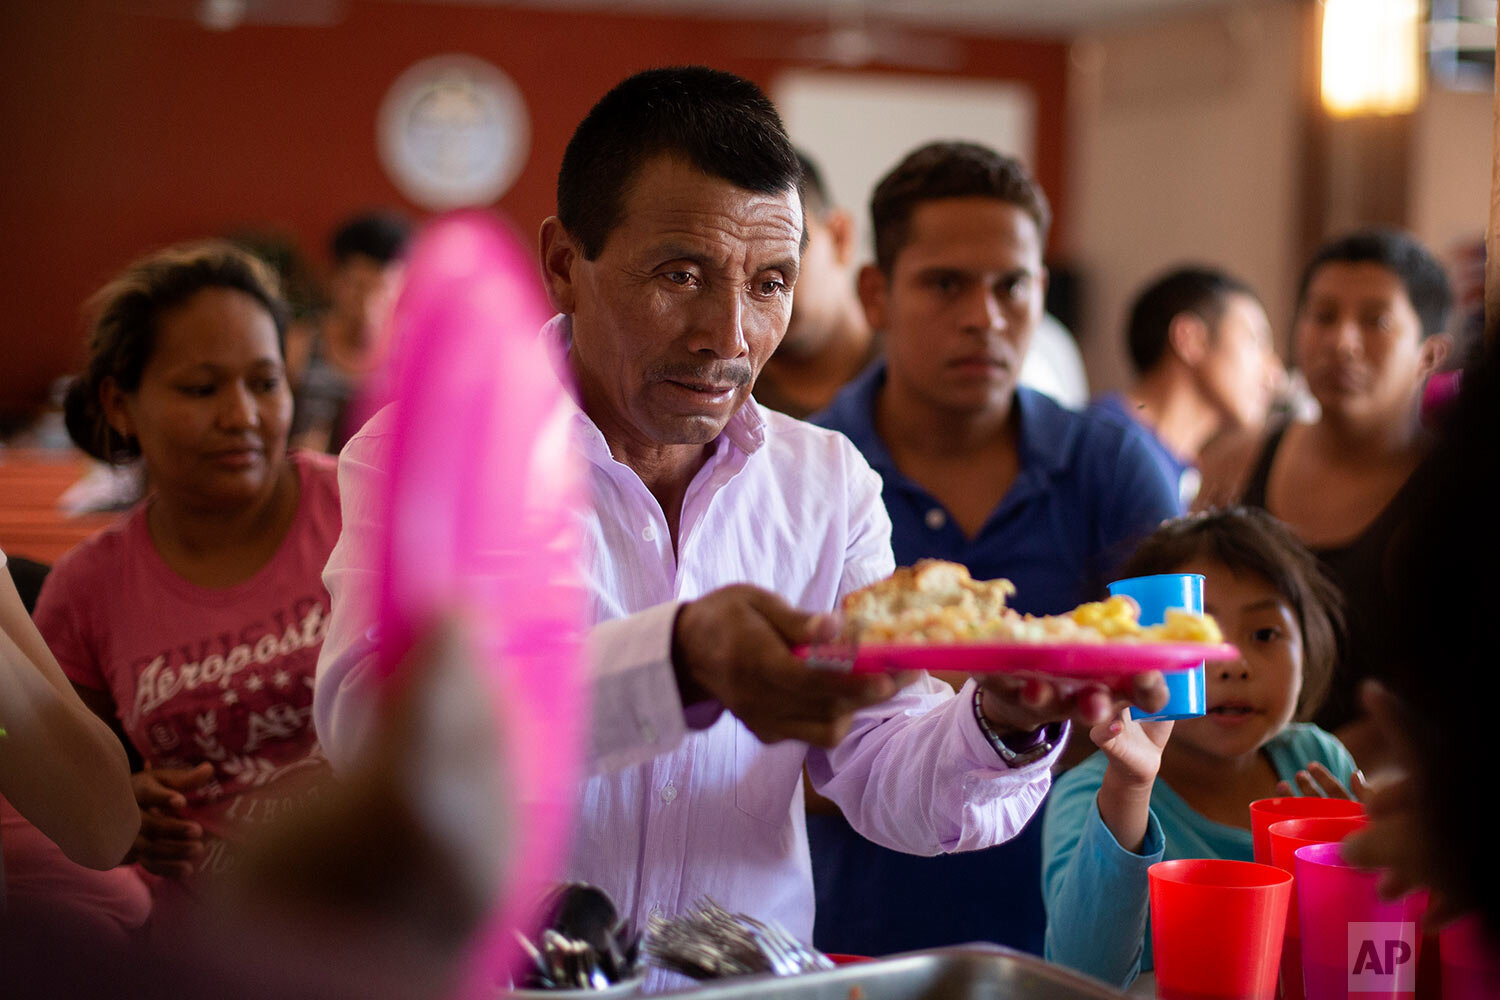  A Guatemalan man gets a plate of food at El Buen Pastor shelter for migrants in Ciudad Juarez, Mexico, on July 25, 2019. (AP Photo/Gregory Bull) 